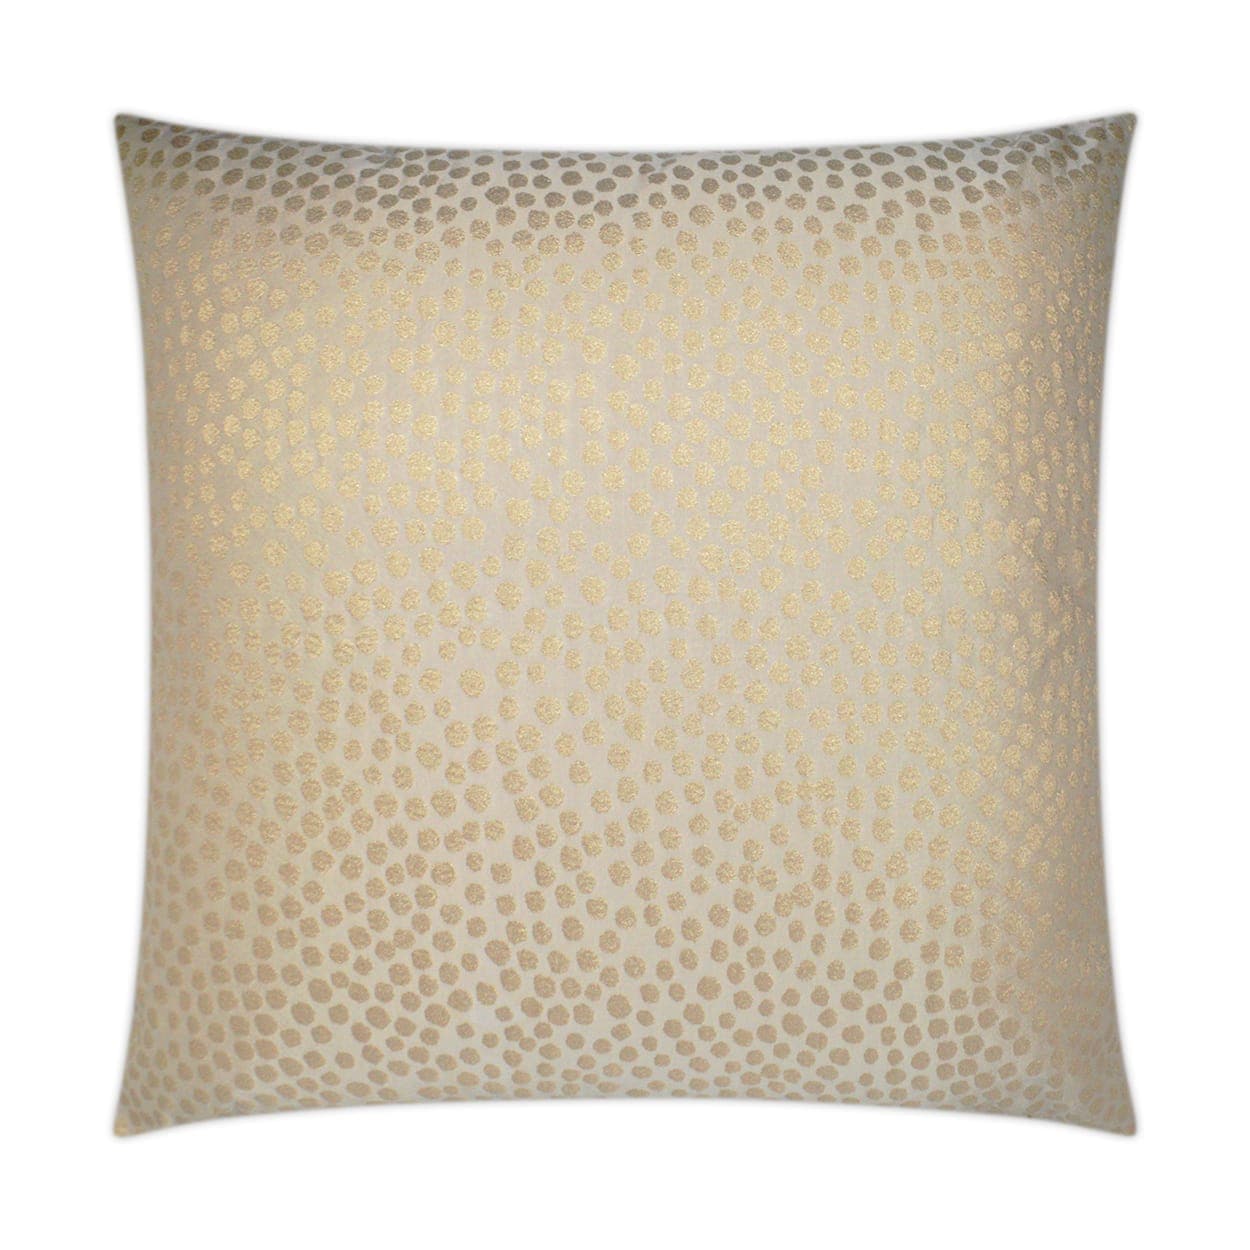 IVORY 006 | Ivory and Gold Polkadot Pillow